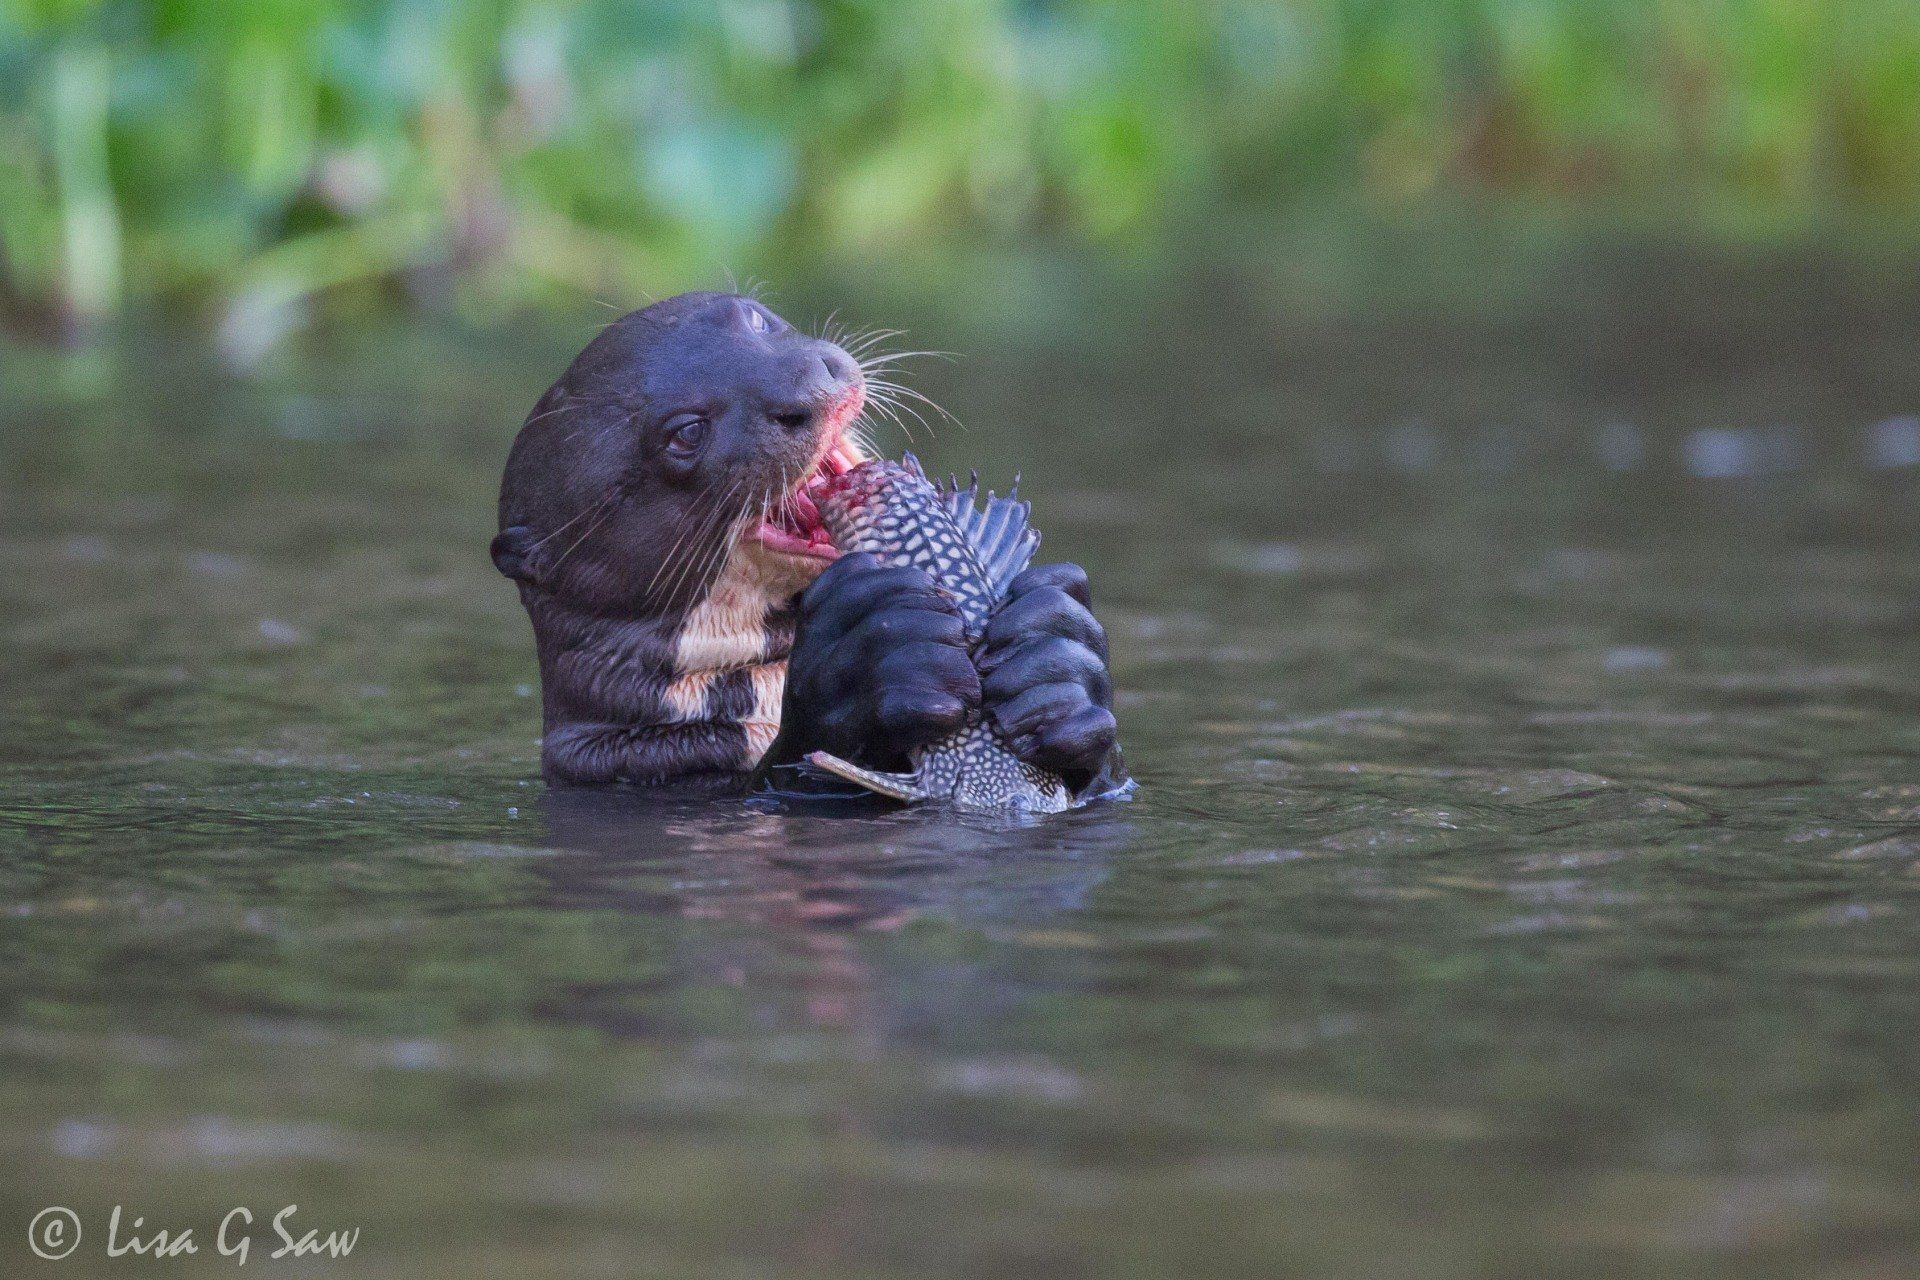 Giant River Otter eating fish in The Pantanal